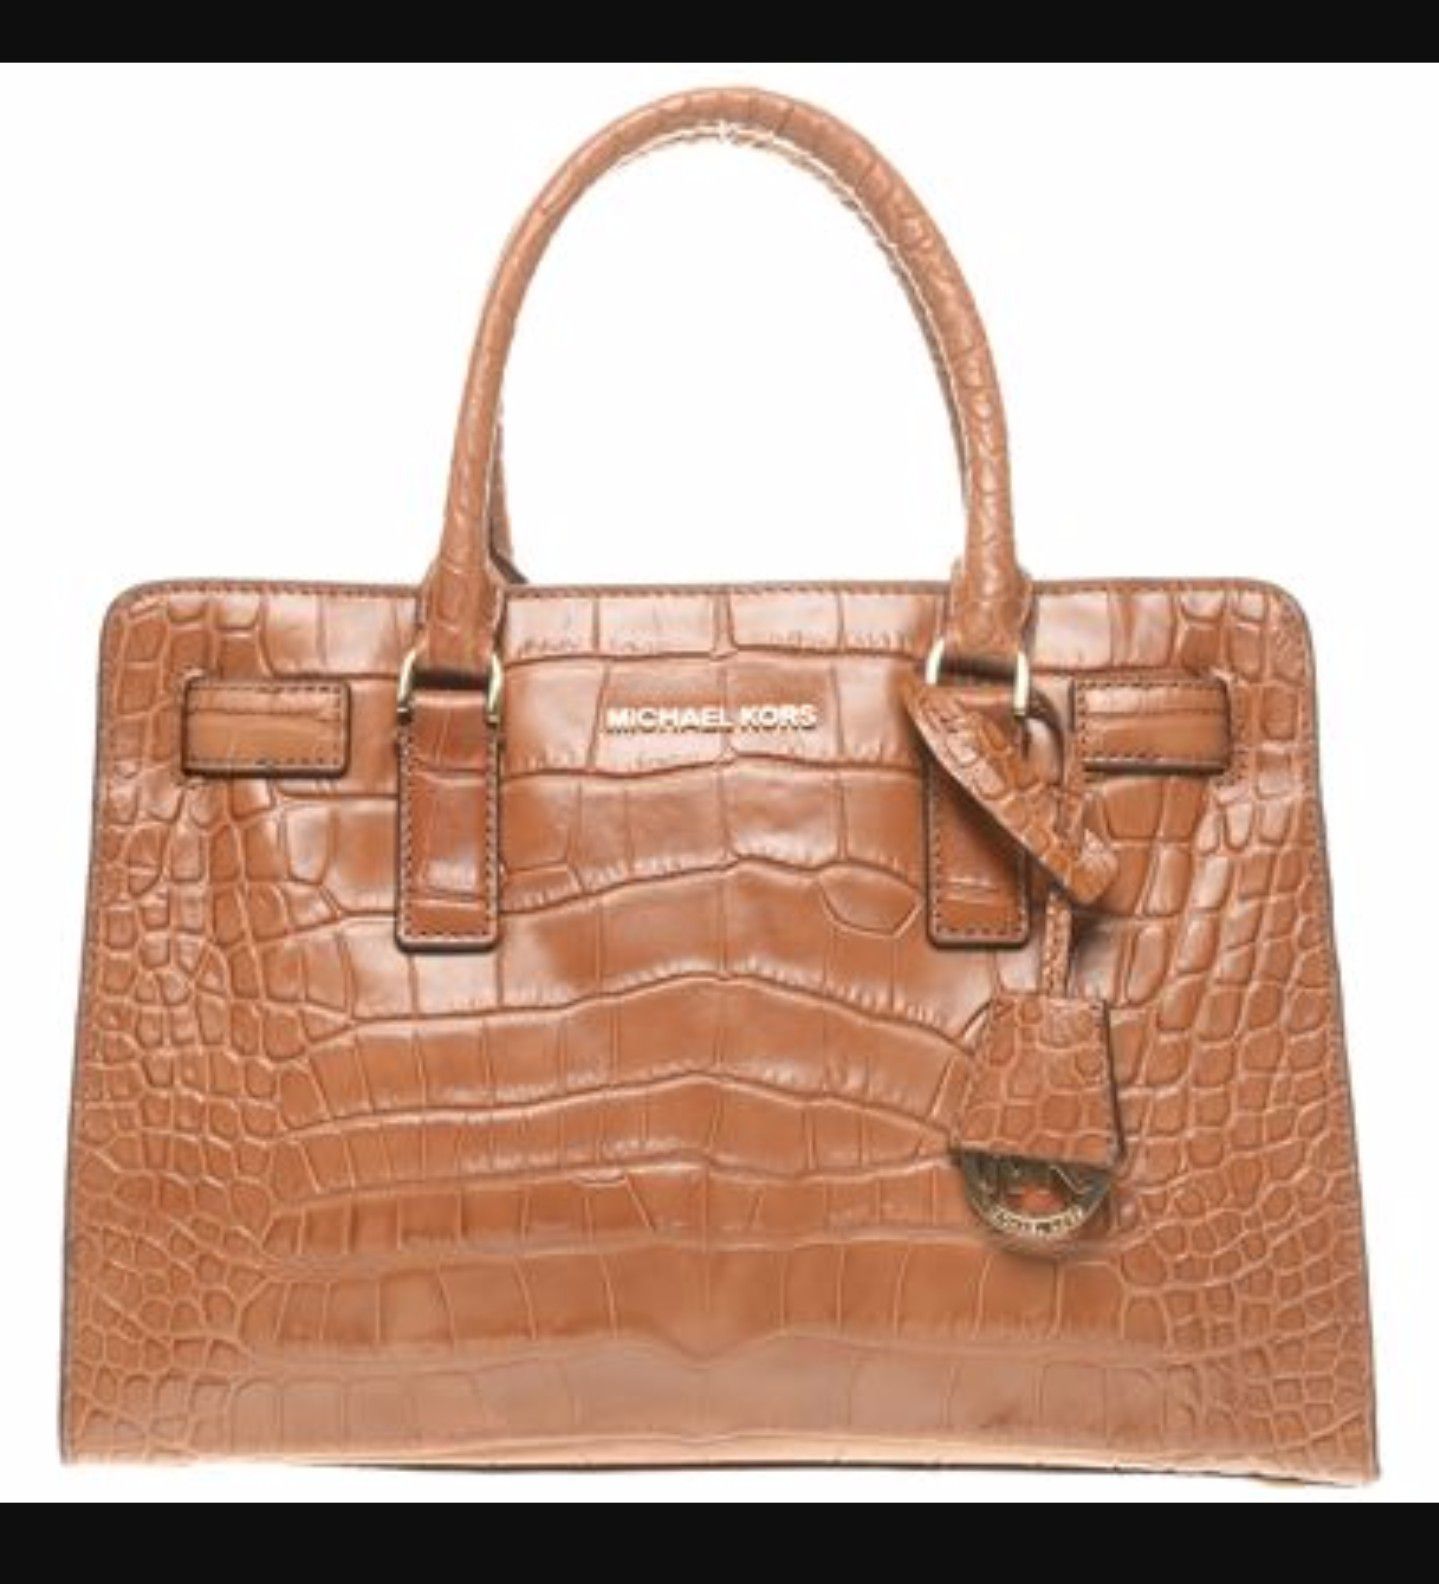 Genuine Michael Kors Dillon East/ West Satchel in Glossy Brown Walnut Pre-Owned